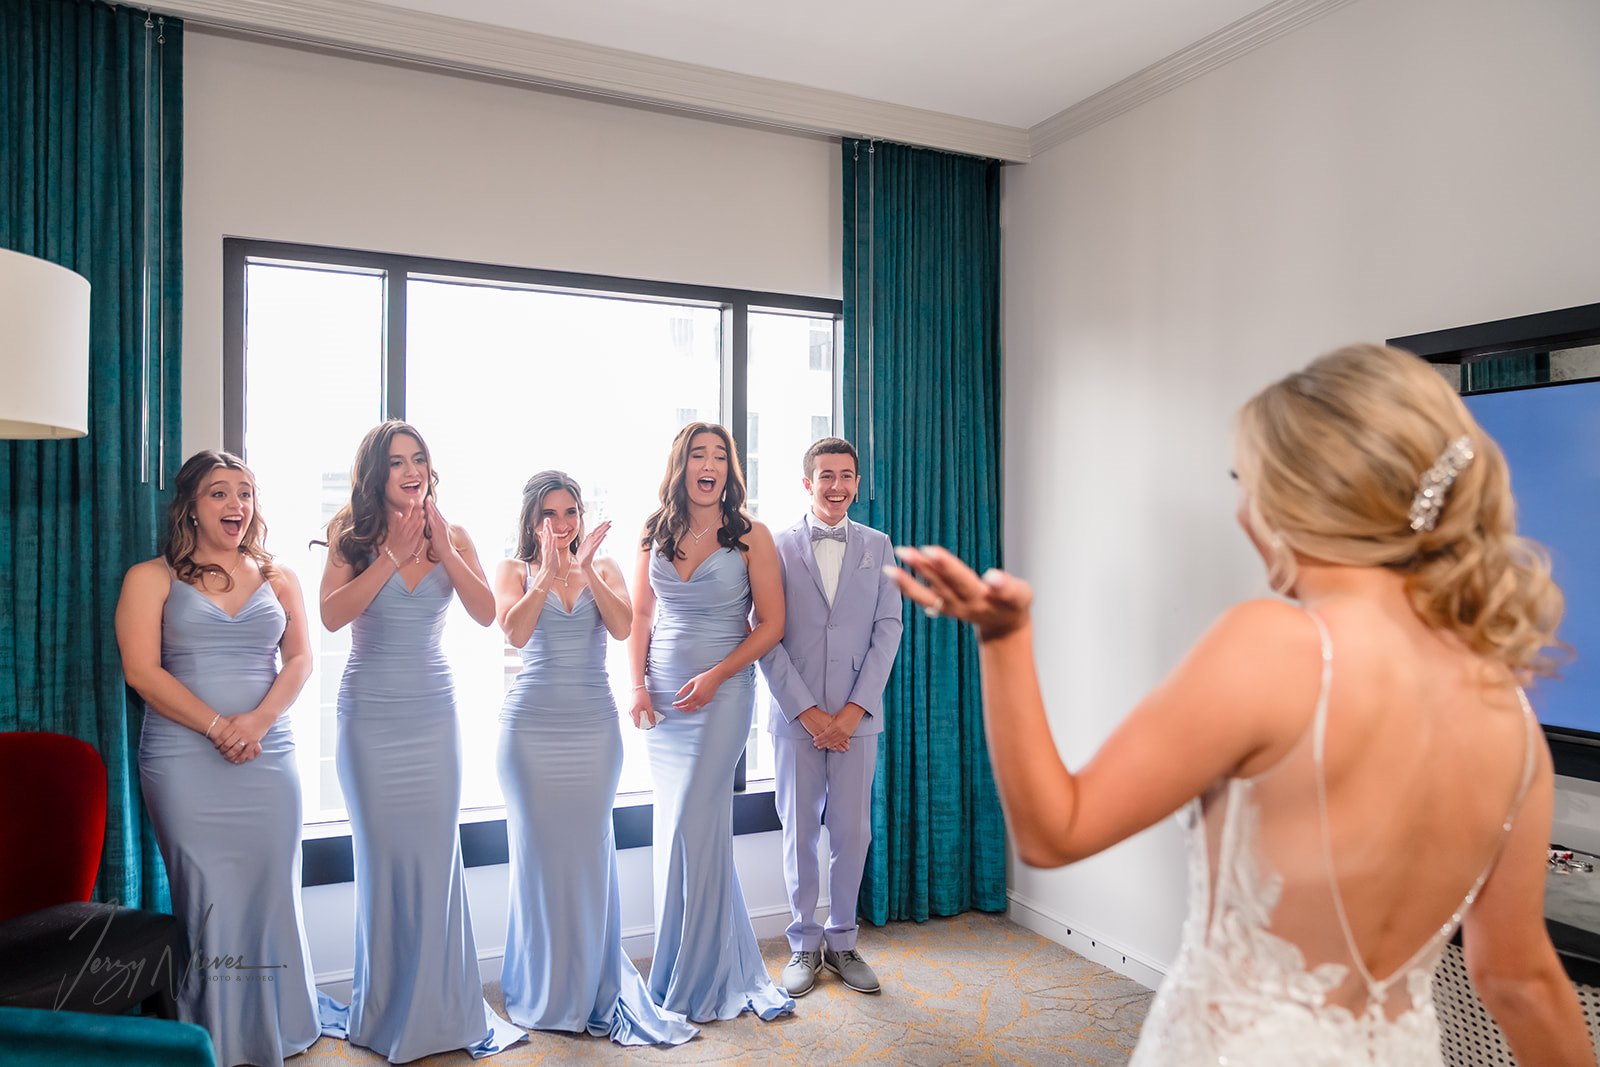 Bridal party's emotional reaction to the bride in her dress after hair and makeup, captured from behind the bride with a focus on their surprised and joyful expressions.